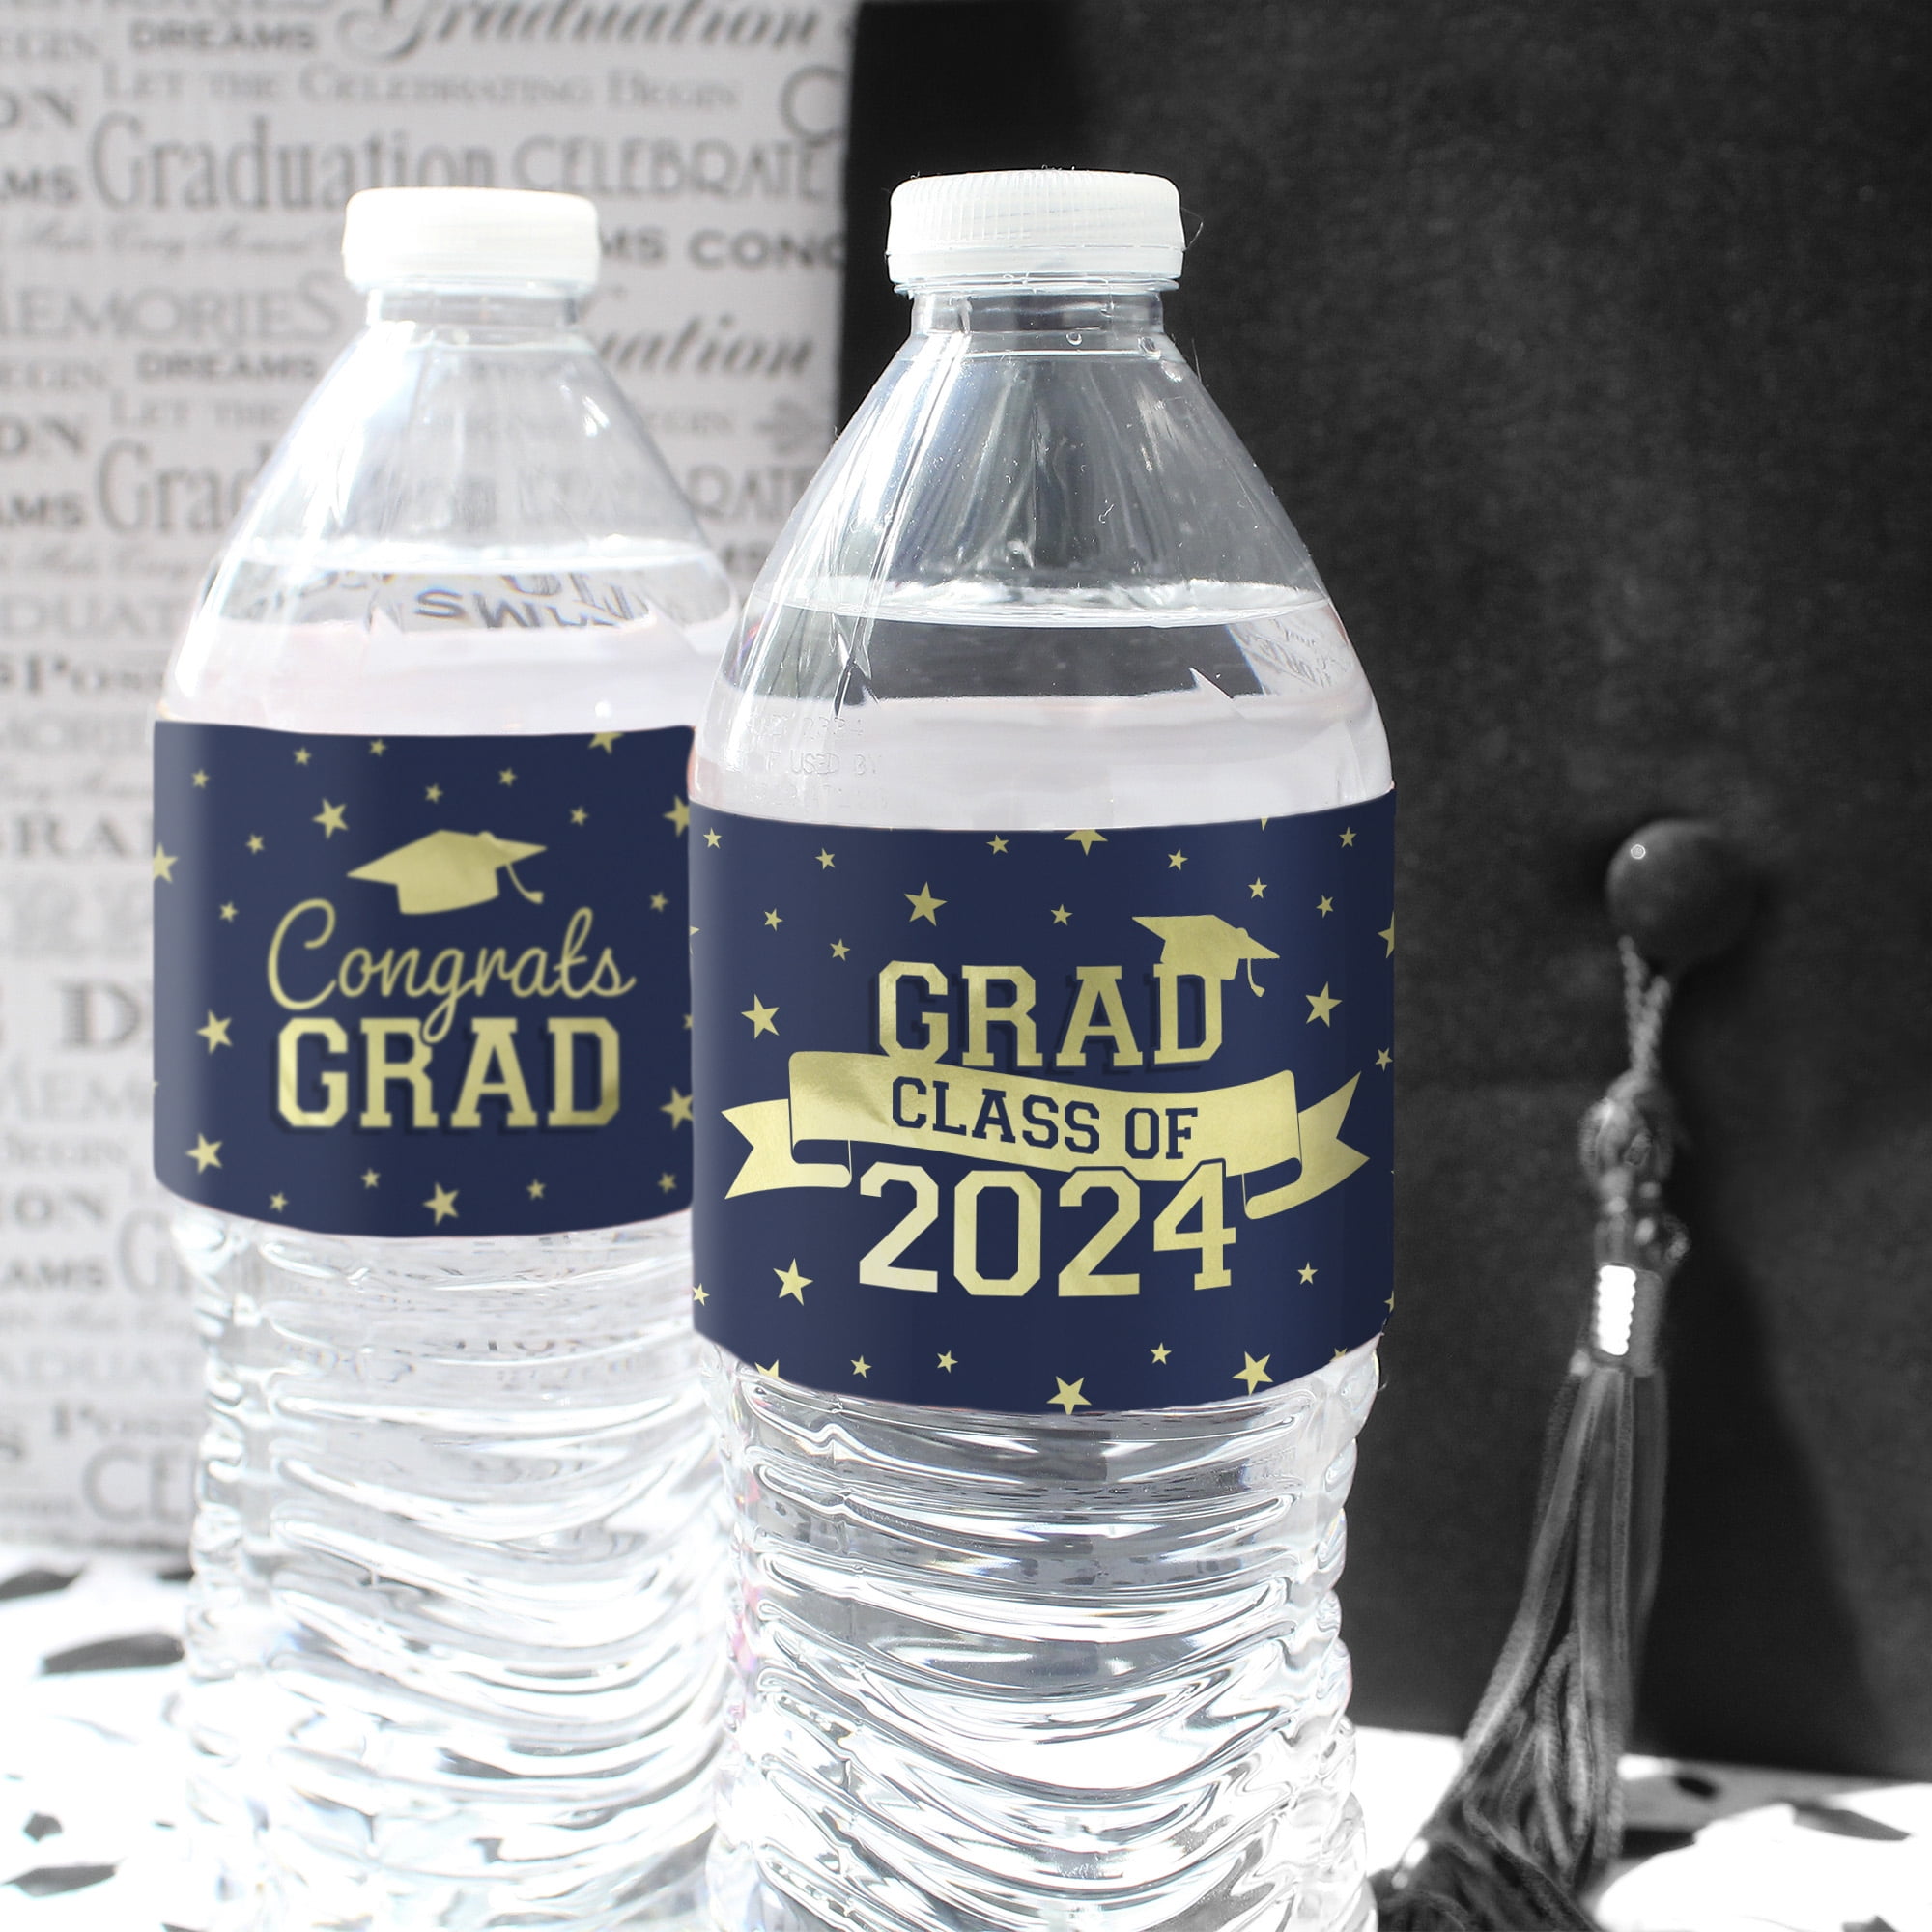 Way to Celebrate Graduation You Got This Metal Water Bottle, White